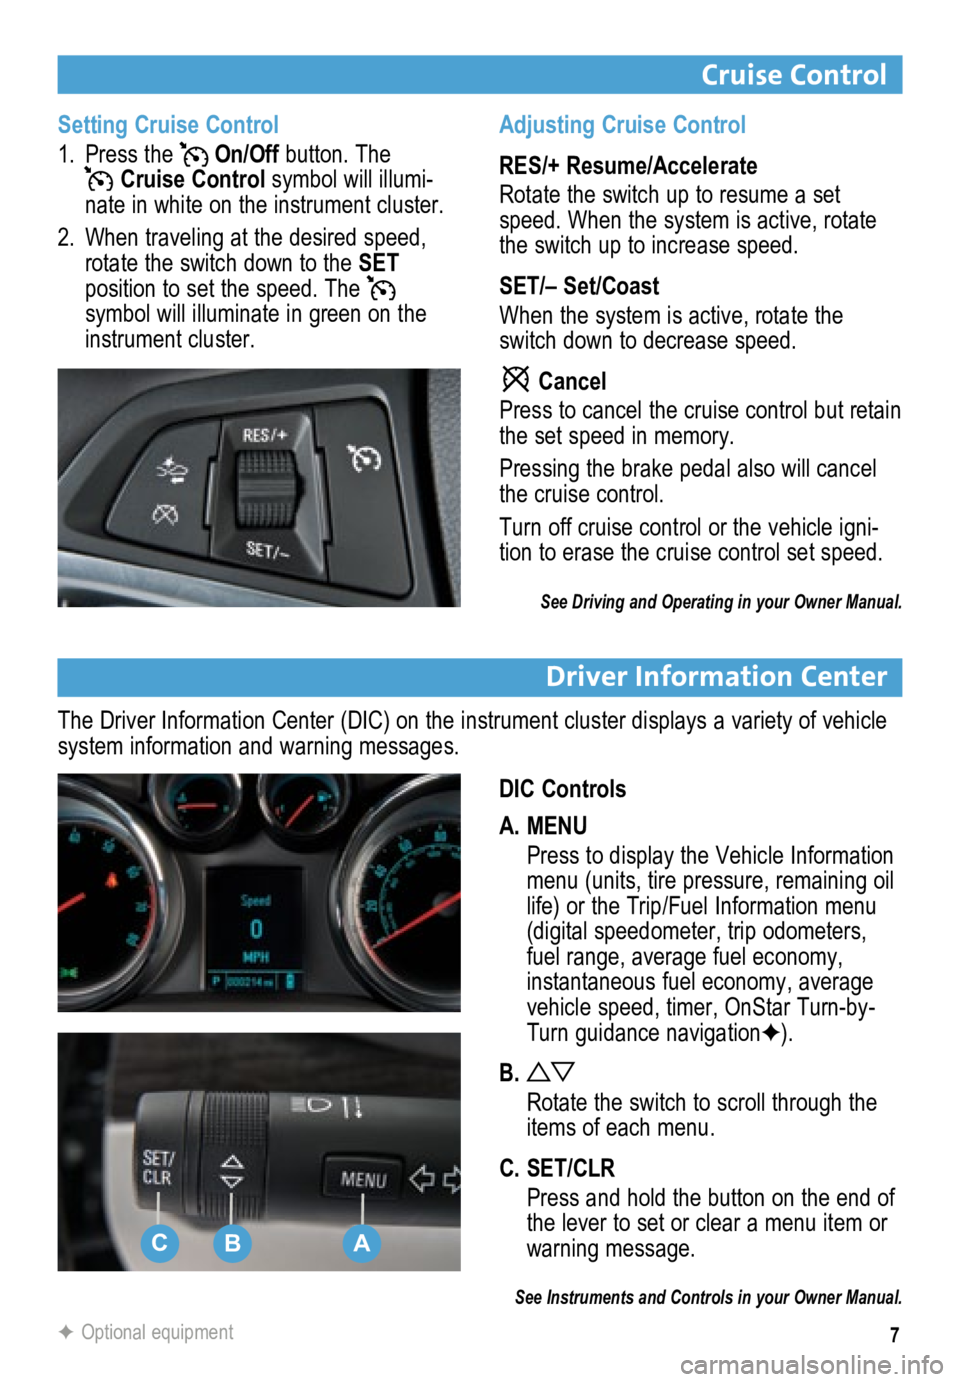 BUICK ENCORE 2013  Get To Know Guide 7
Cruise Control
Driver Information Center
DIC Controls
A. MENU
 Press to display the Vehicle Information 
menu (units, tire pressure, remaining oil 
life) or the Trip/Fuel Information menu 
(digital 